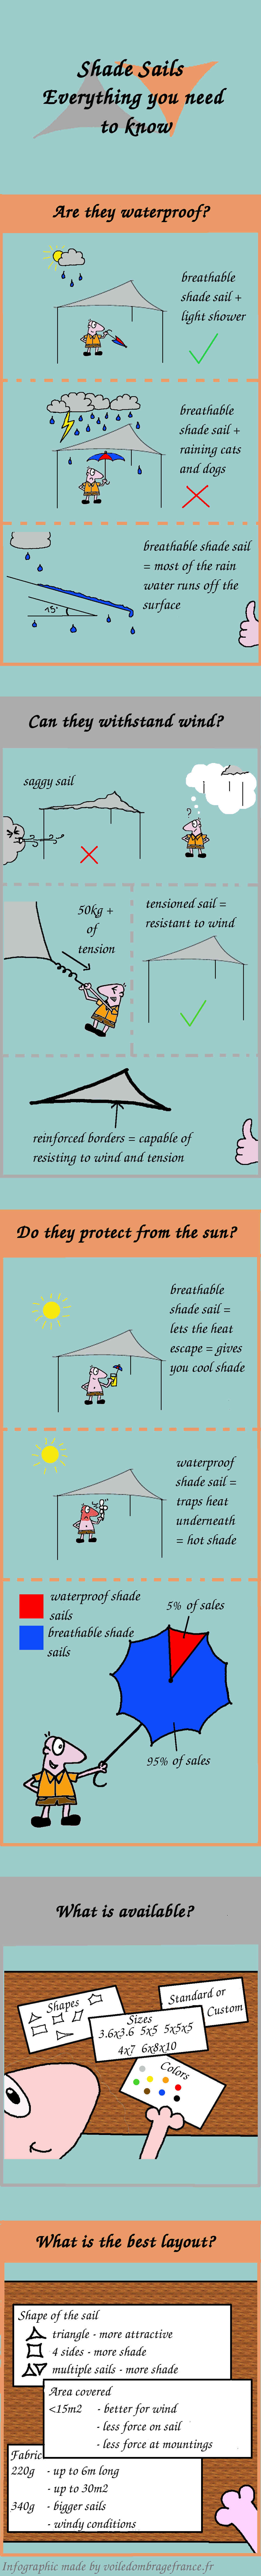 Shade Sail Buyers Guide Infographic